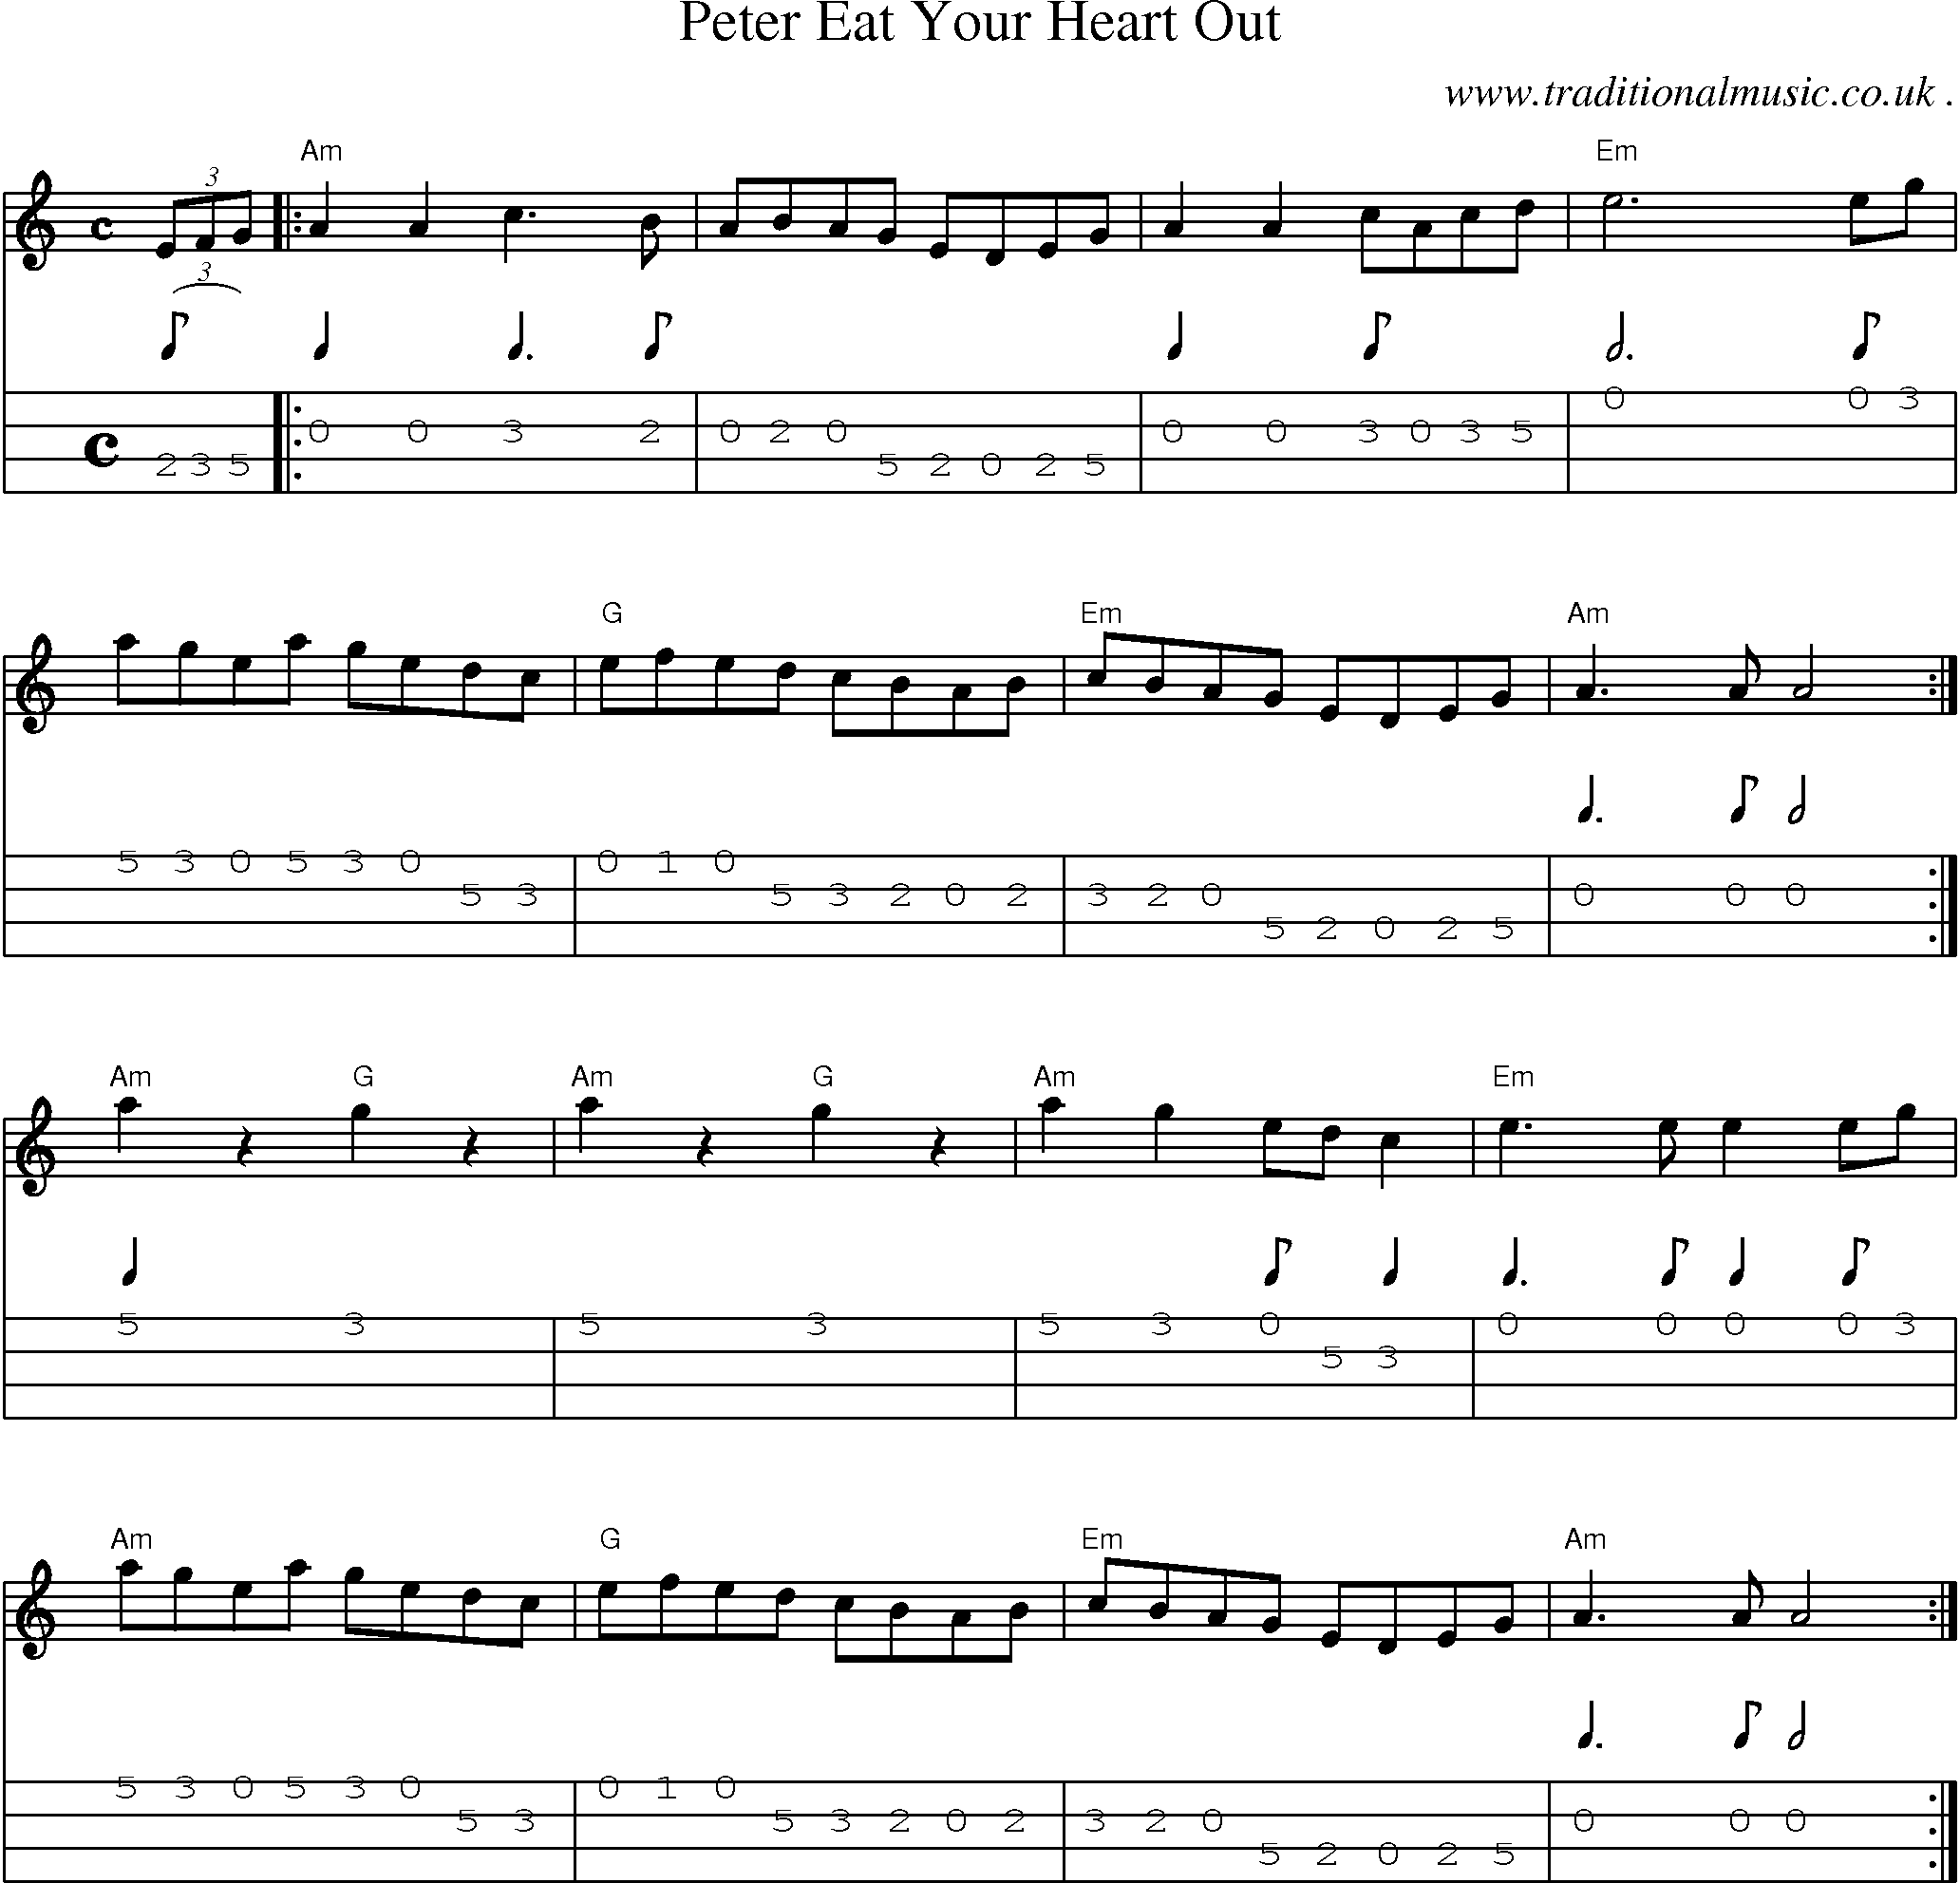 Music Score and Guitar Tabs for Peter Eat Your Heart Out